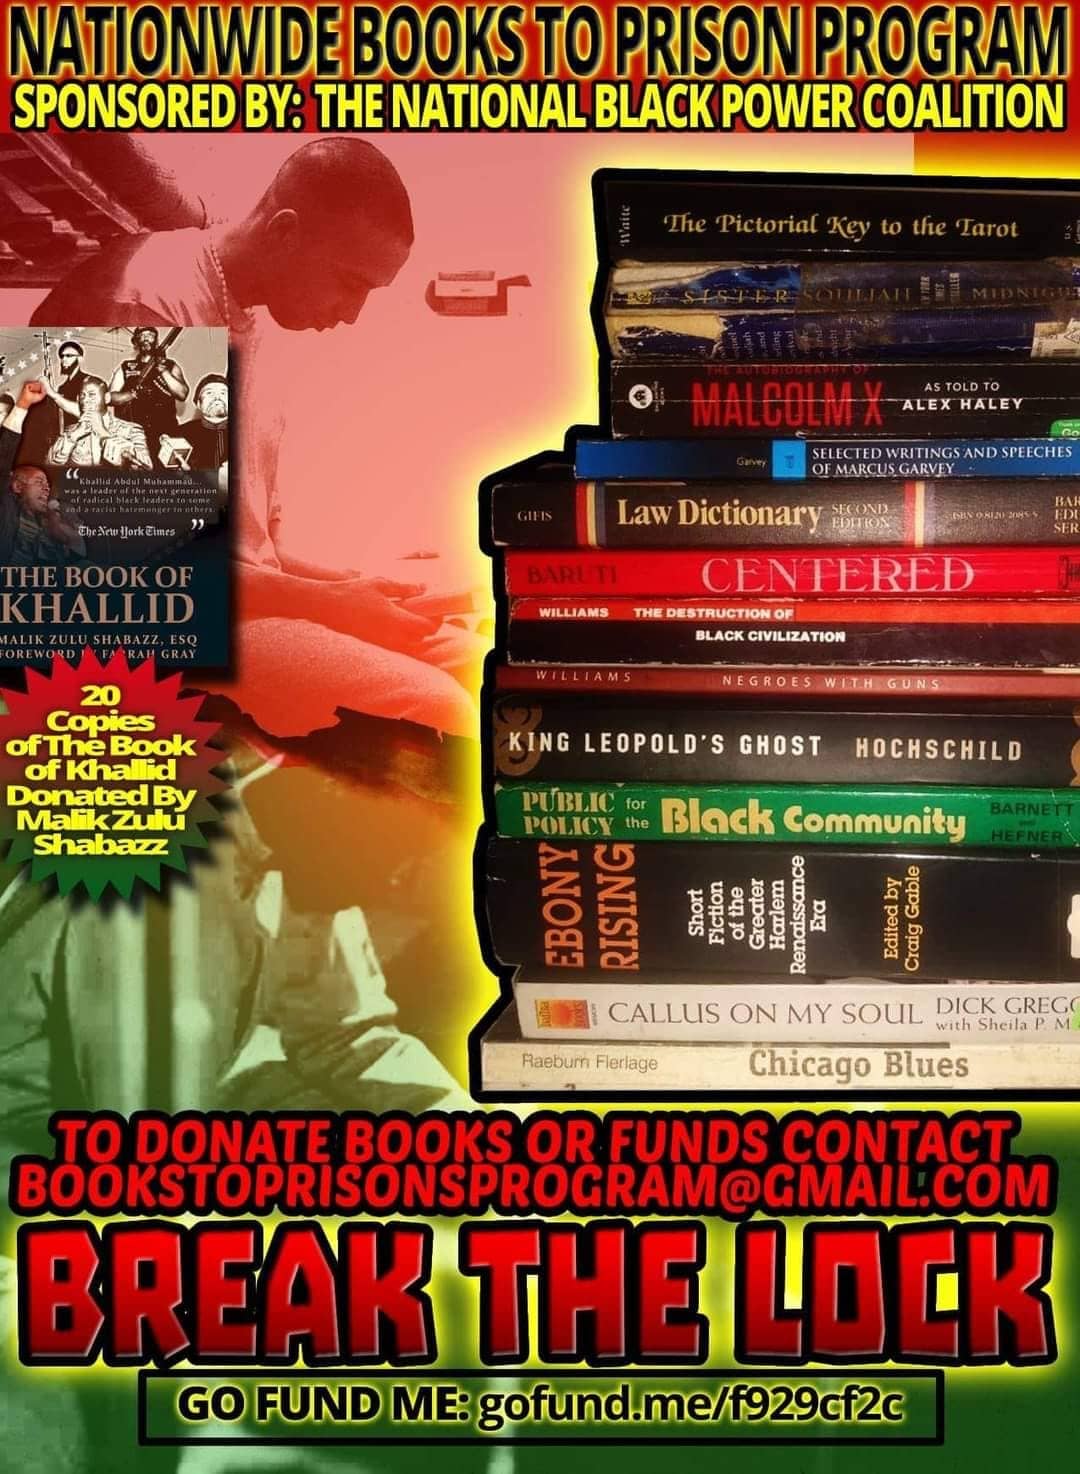 Nationwide-Books-to-Prison-Program, <strong>Black Defense Committee has Spoken: Liberation For All!</strong>, Local News & Views News & Views 